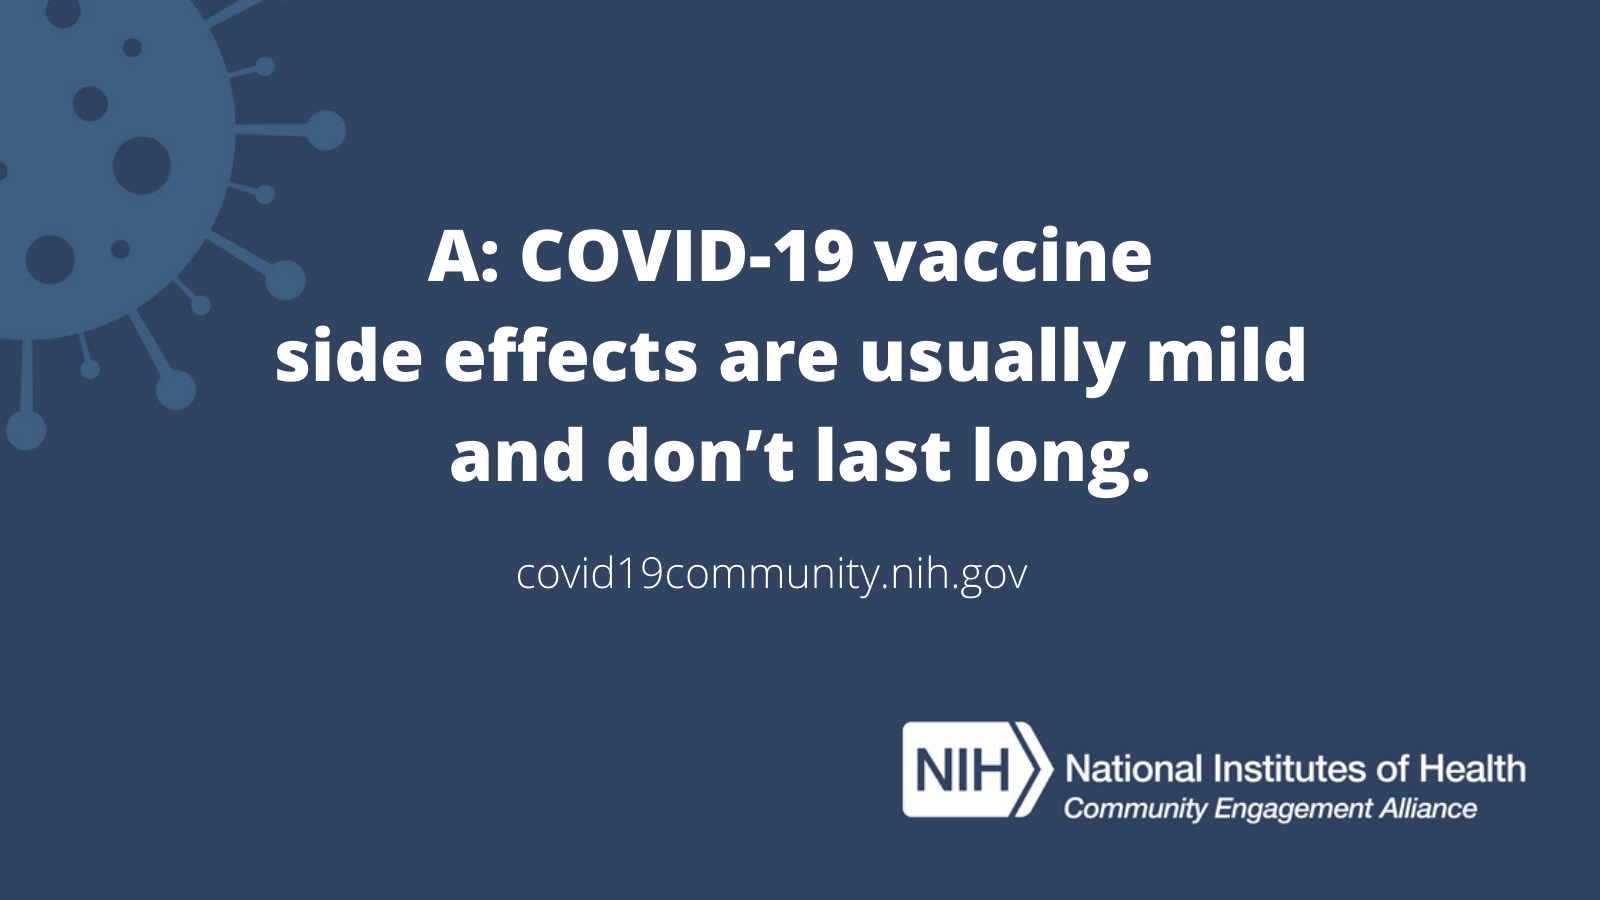 Text reads: “A: COVID-19 vaccine side effects are usually mild and don’t last long."